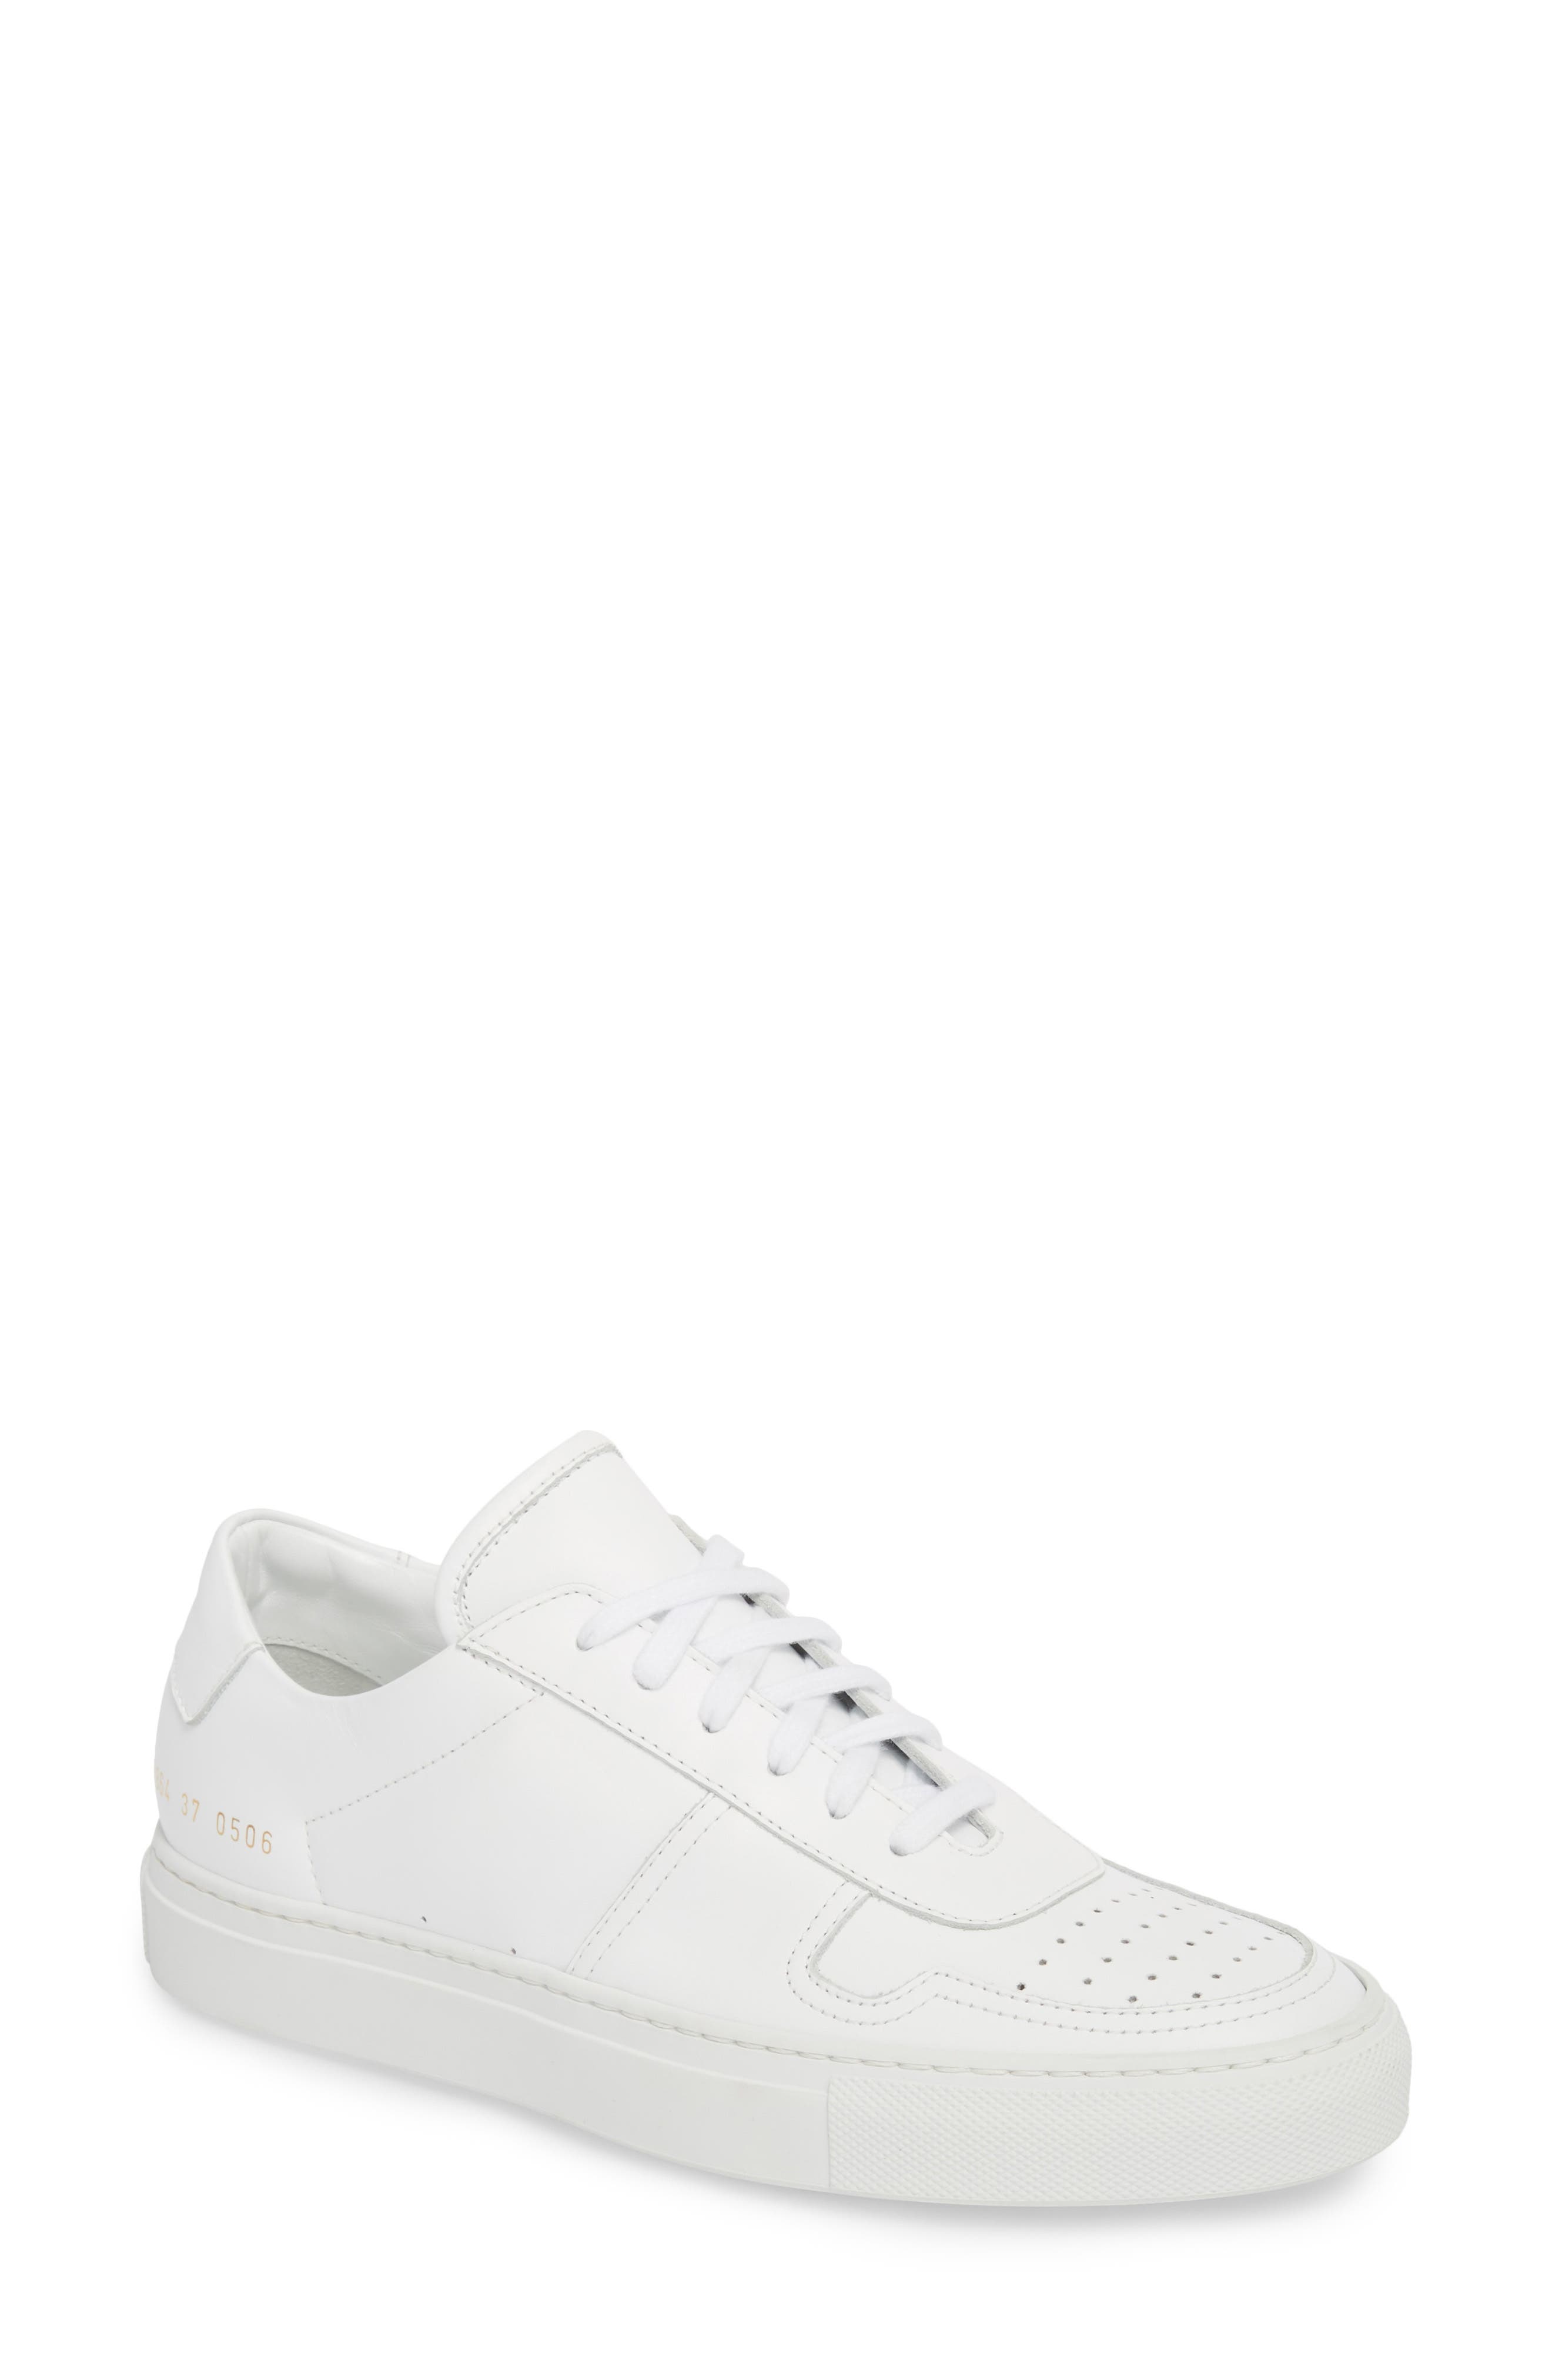 common projects bball low sneakers